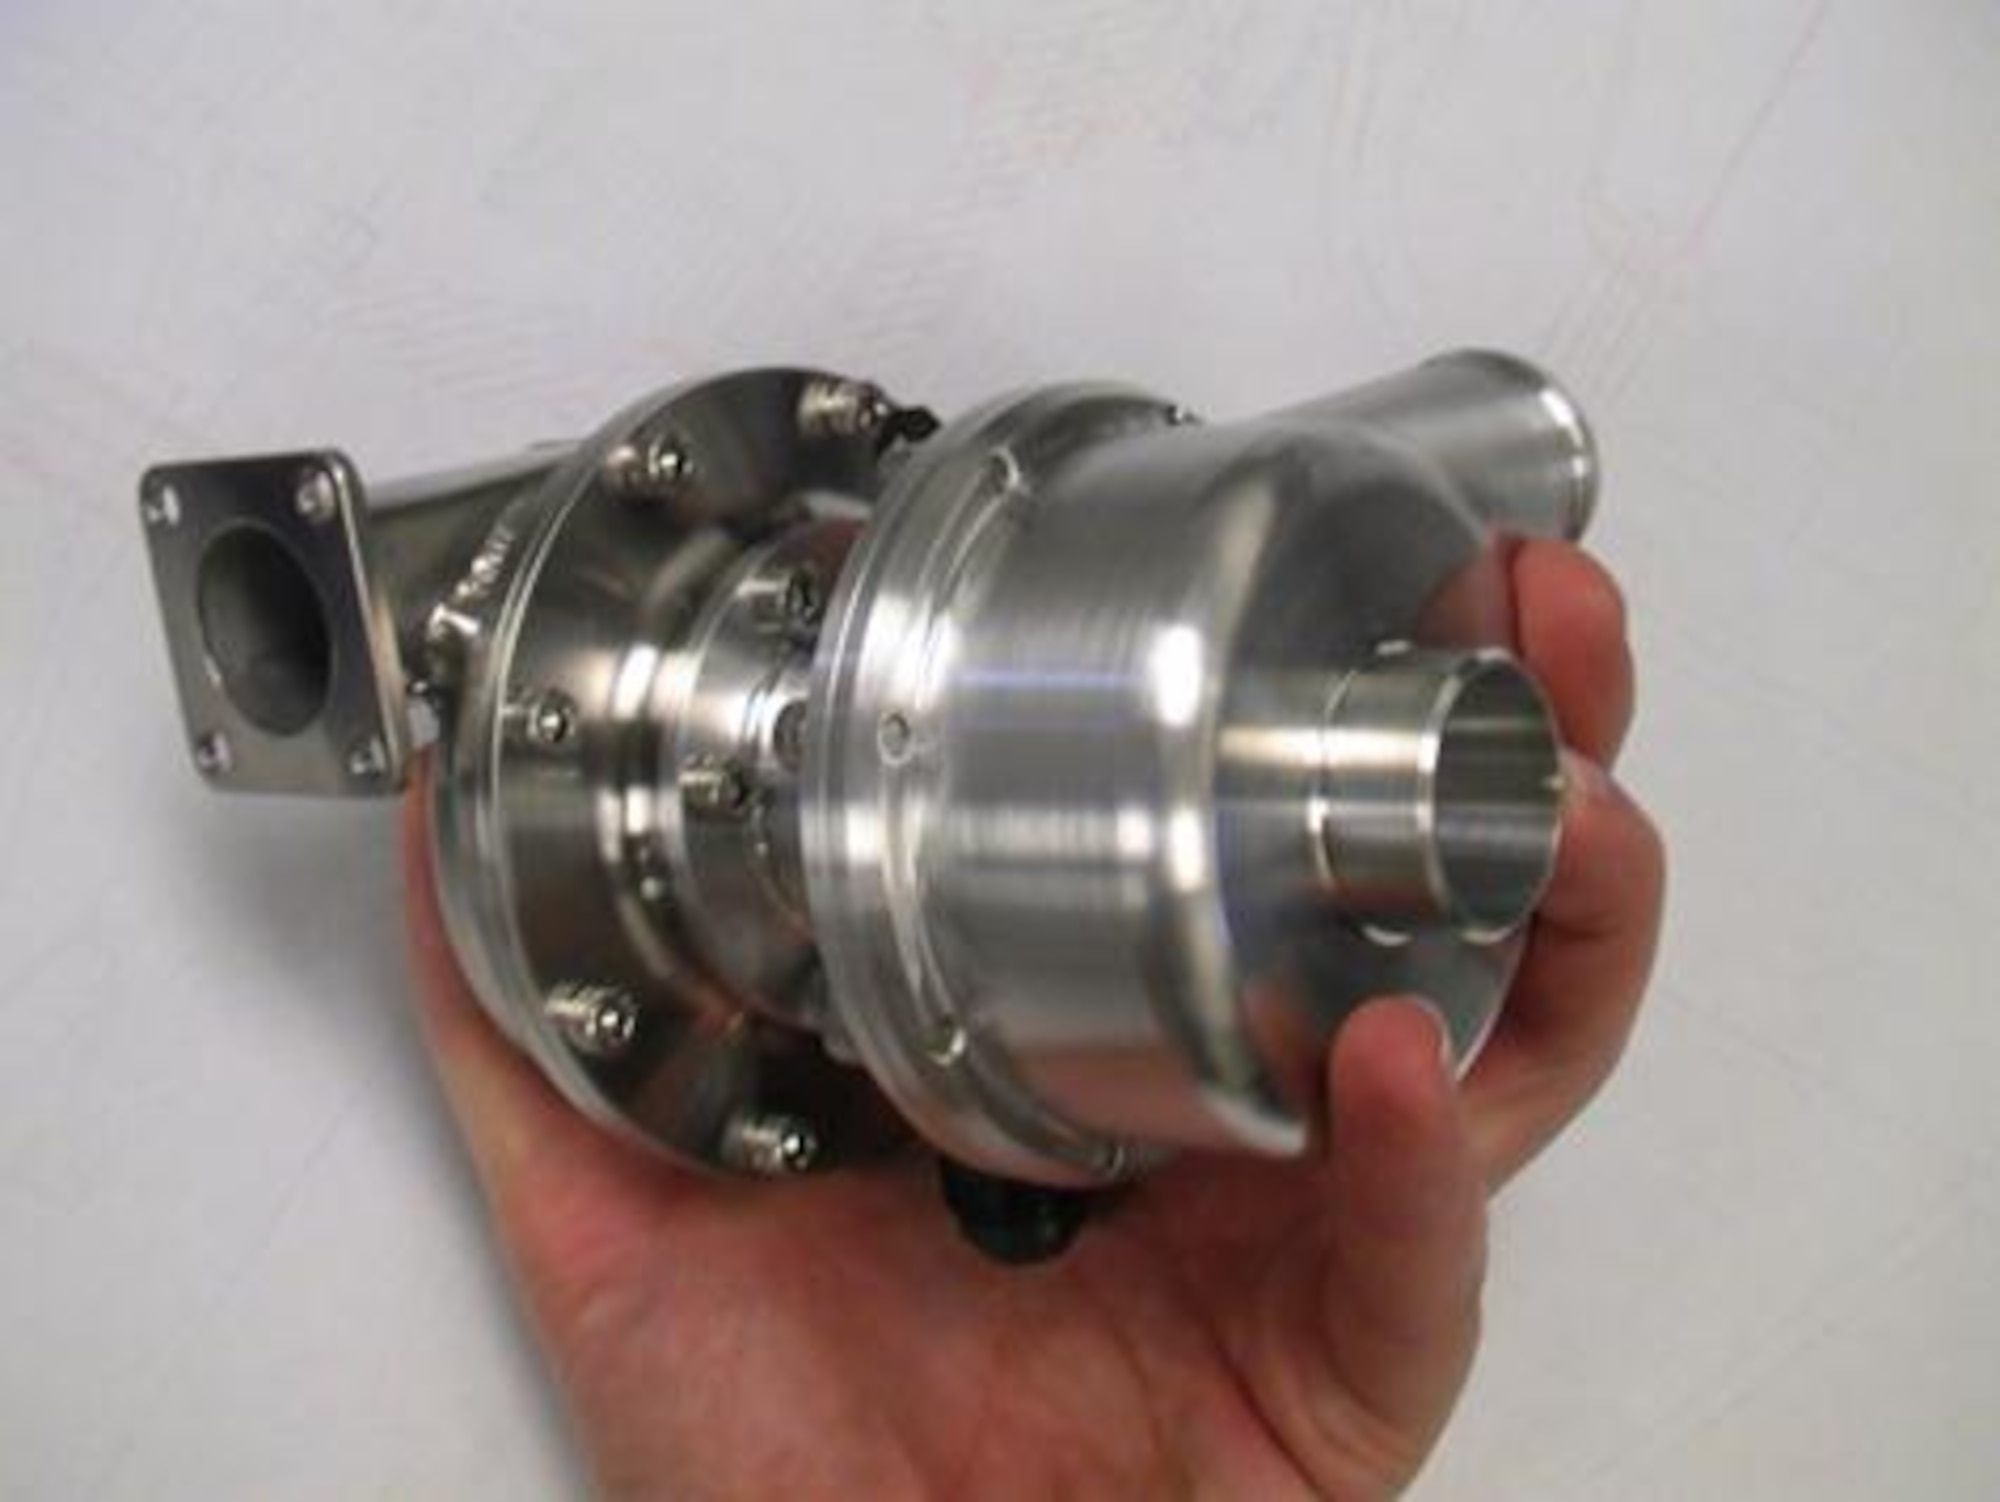 Lightweight turbocharger, intended for use on 30-50 horsepower class engines, has potential application to a wide variety of vehicles, such as unmanned air vehicles, airborne auxiliary power units, and private aircraft.  (AFRL Image)